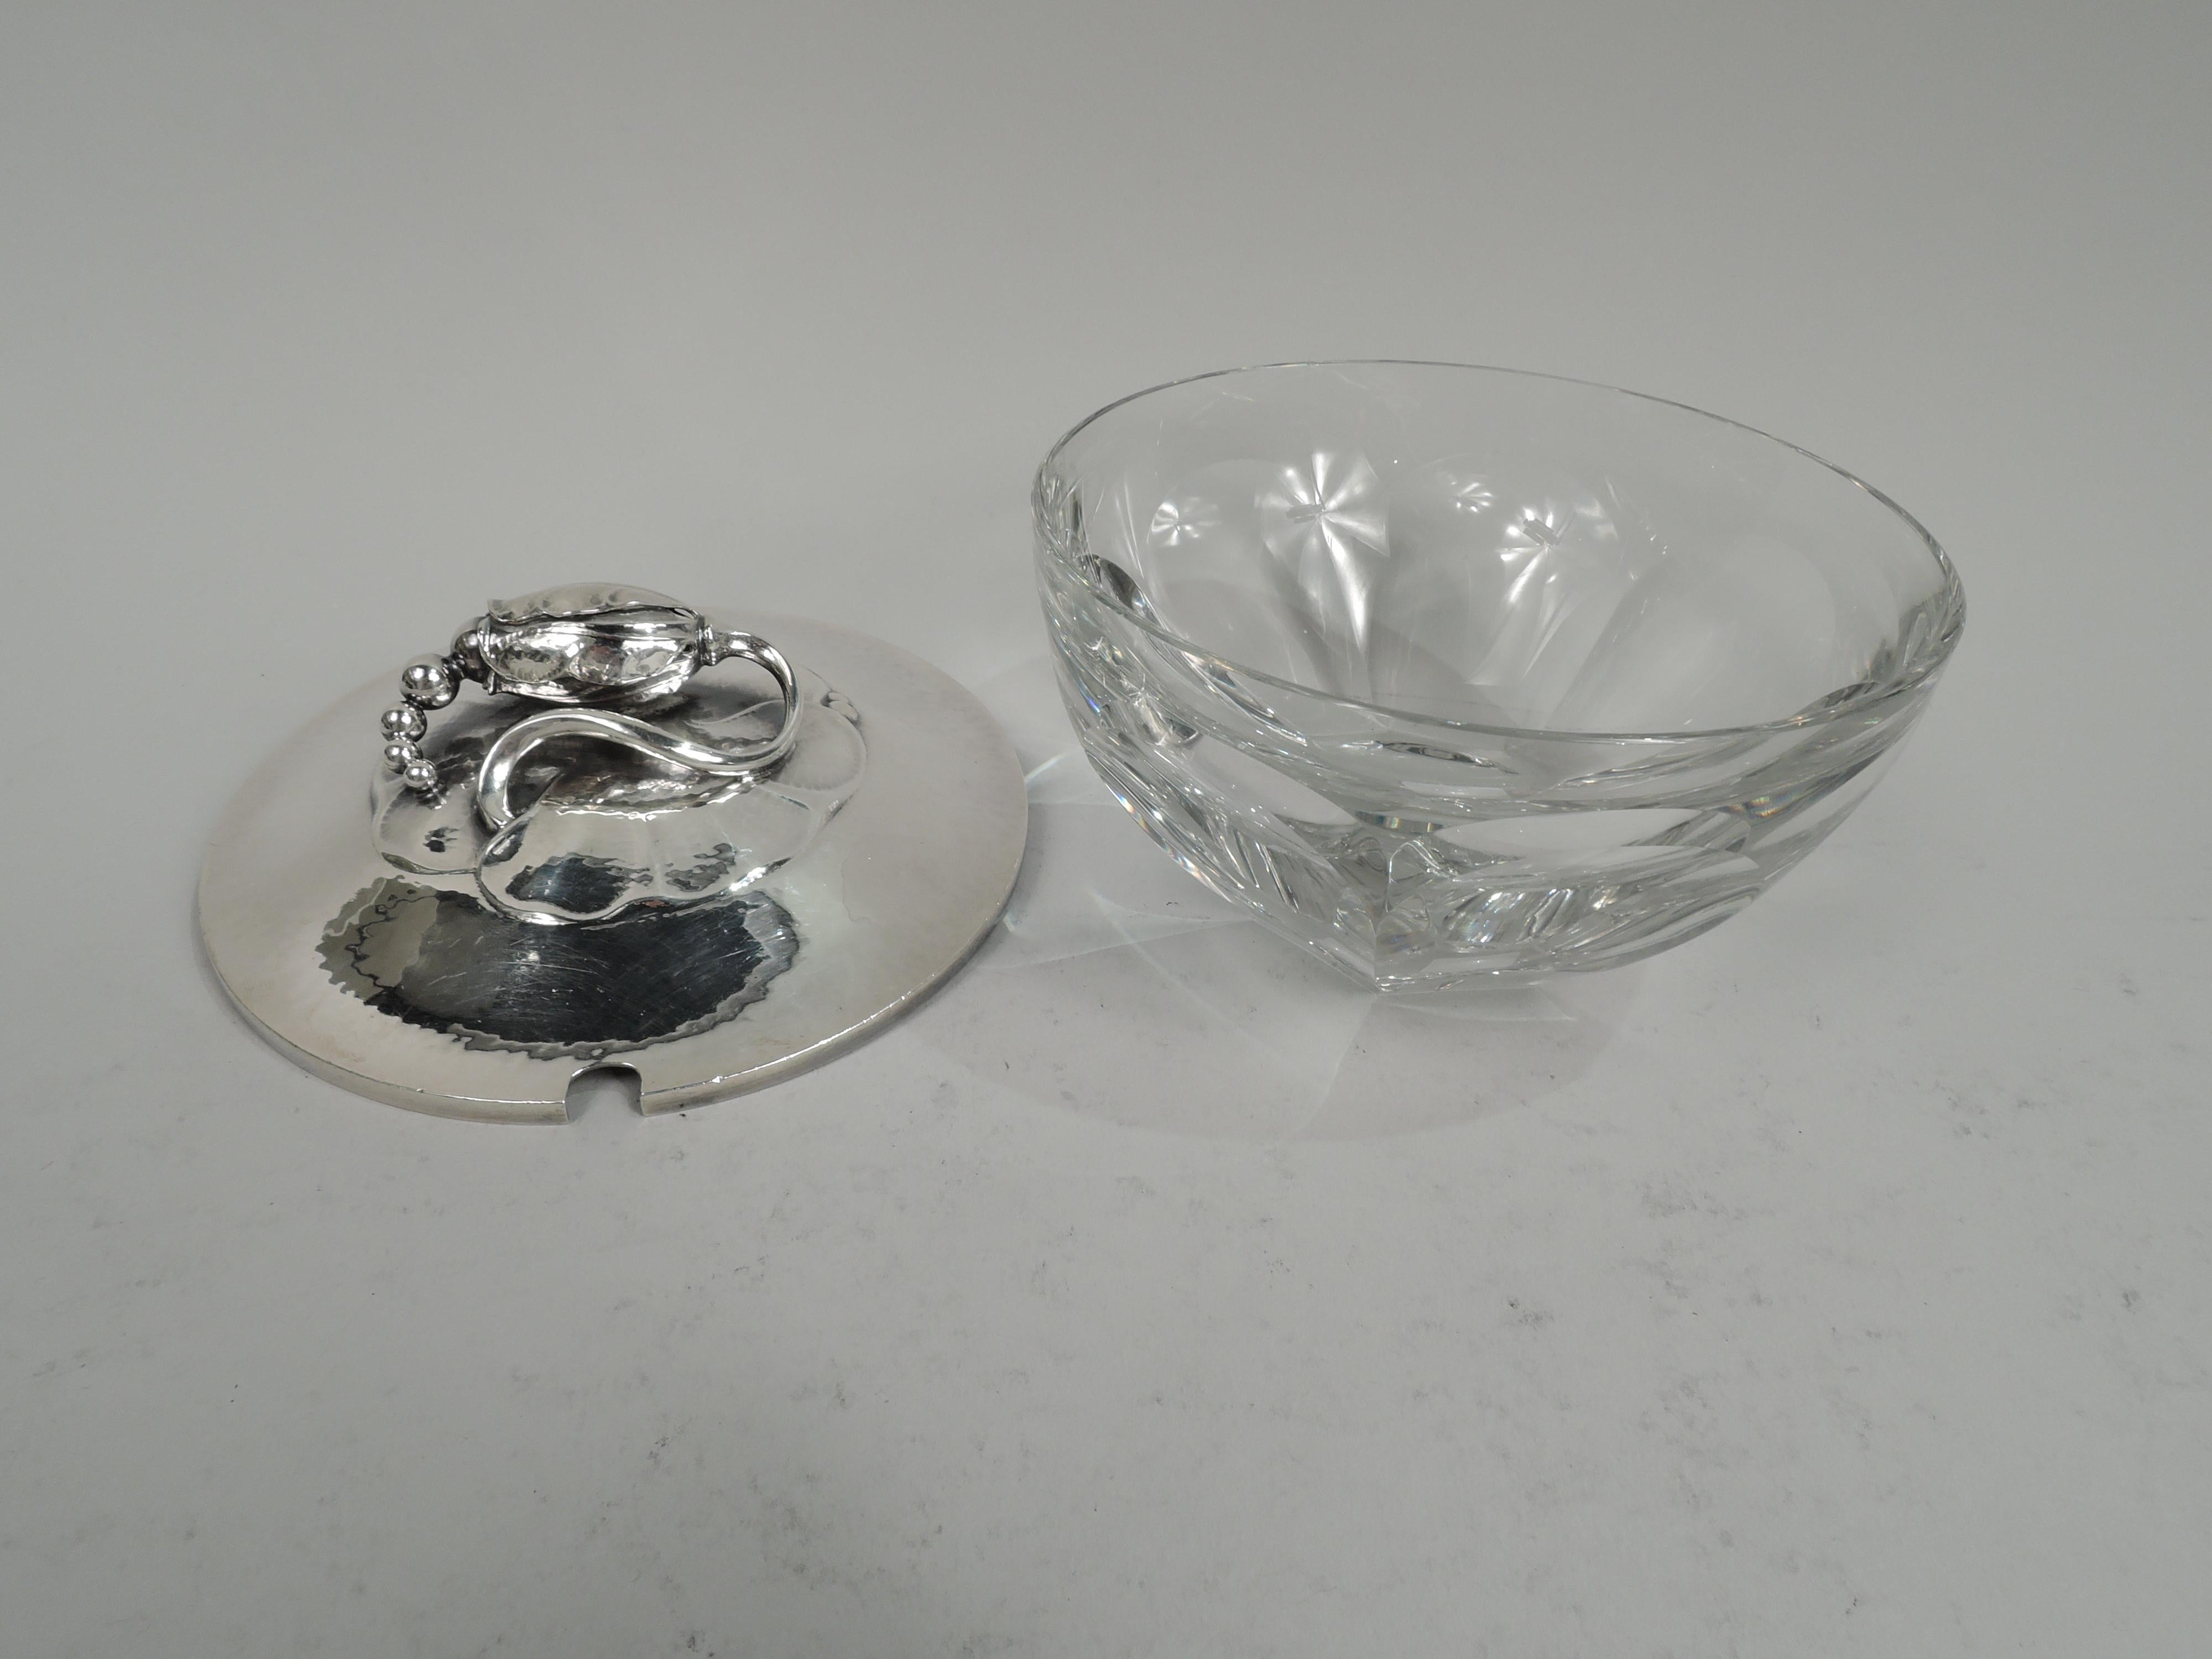 Blossom jelly bowl. Round crystal bowl with lobed and tapering sides. Cover sterling silver with gently raised and hand-hammered; on top is seed-spilling mounted to chased petal medallion. This design illustrated in Drucker, Georg Jensen, 1997, p.